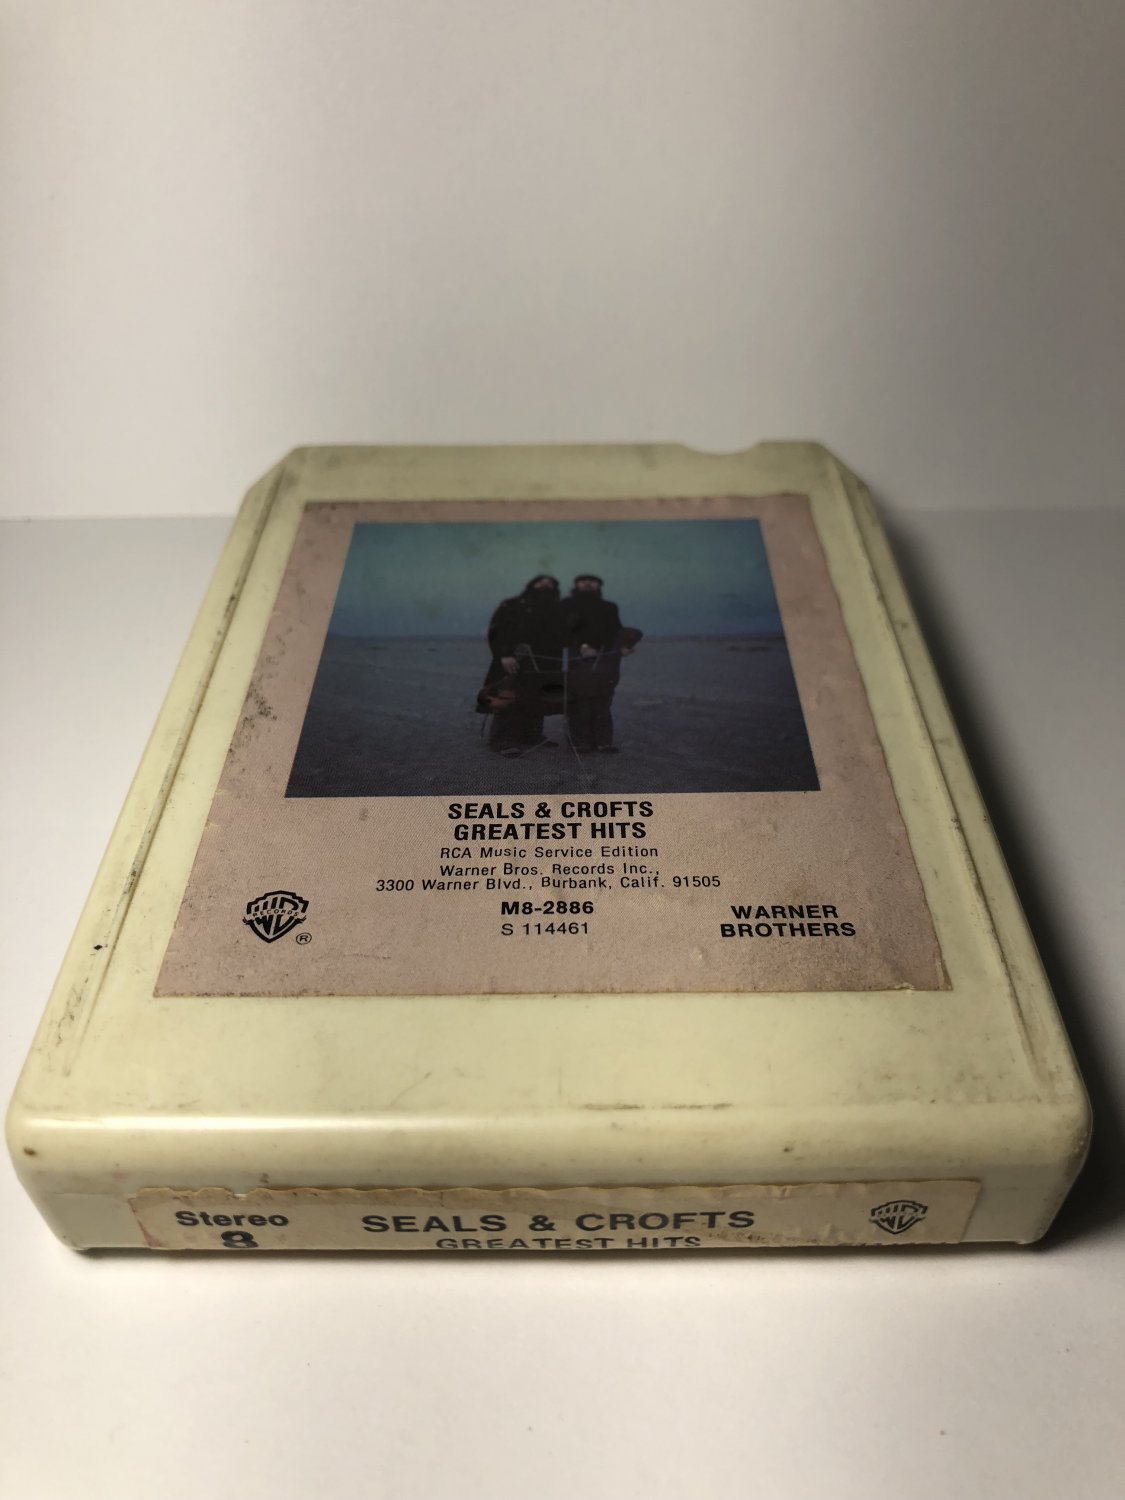 Restore Your Own Seals Crofts Greatest Hits As Is 8 Track Tape